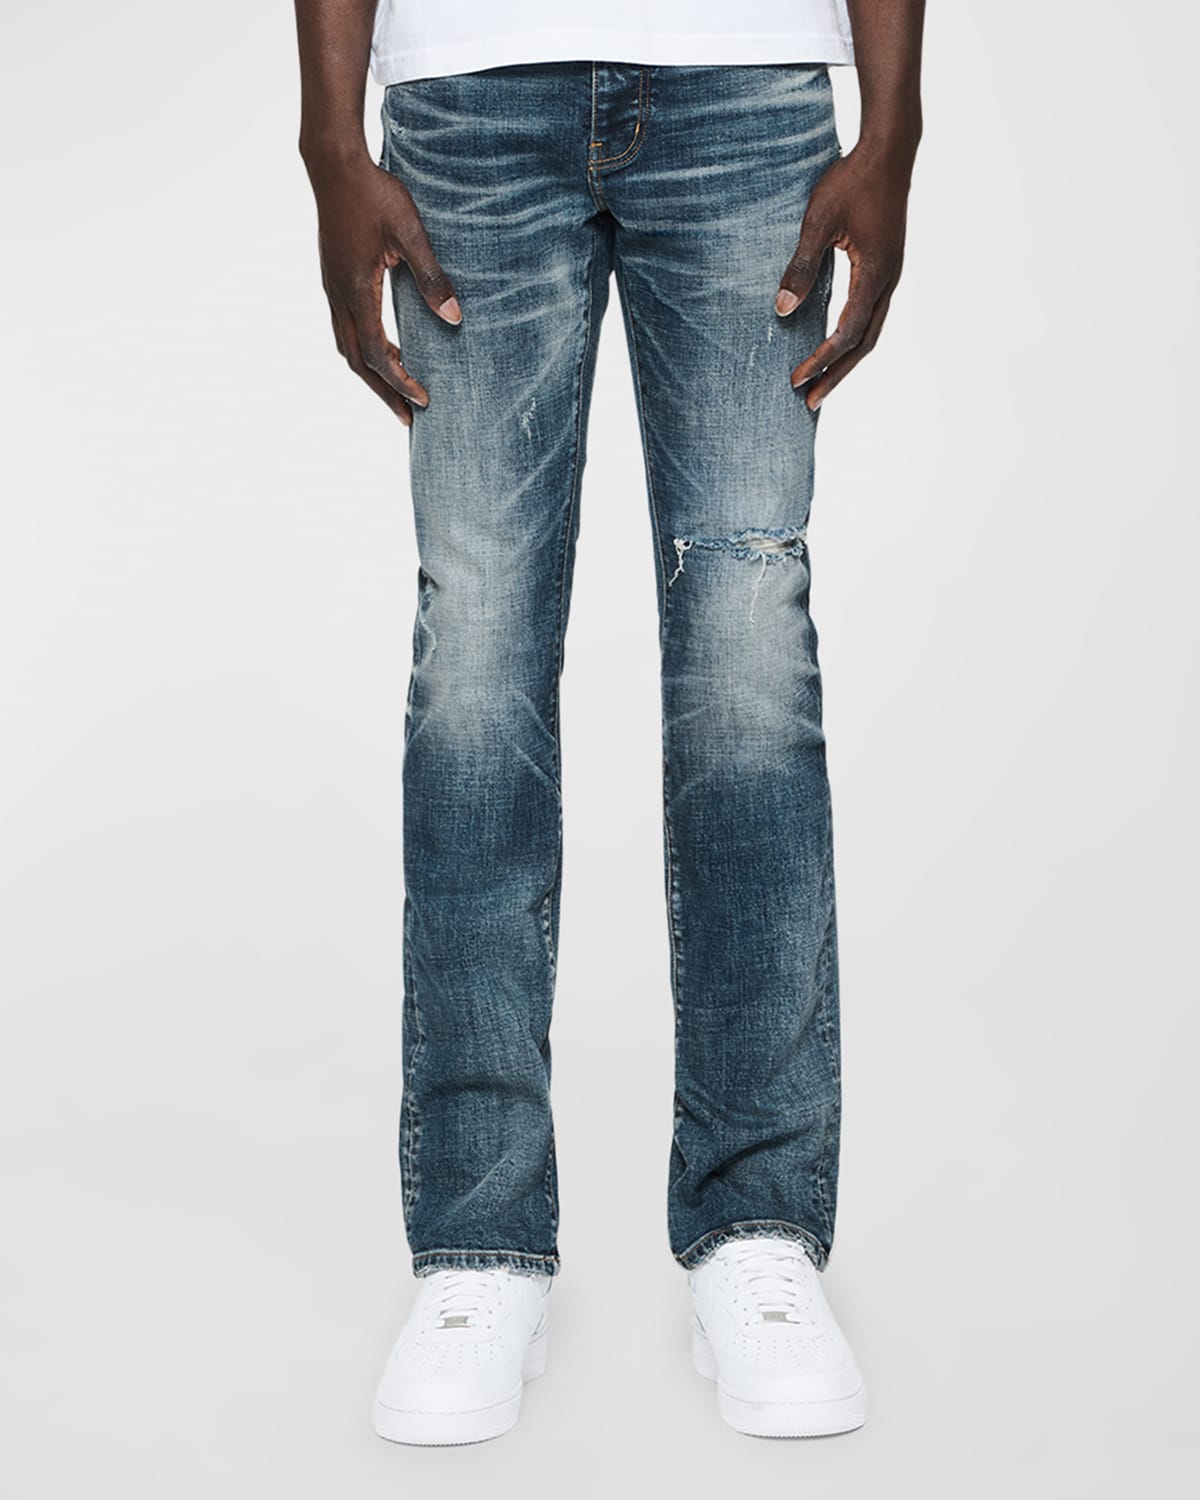 Men's P004 One Year Fade Flare Jeans